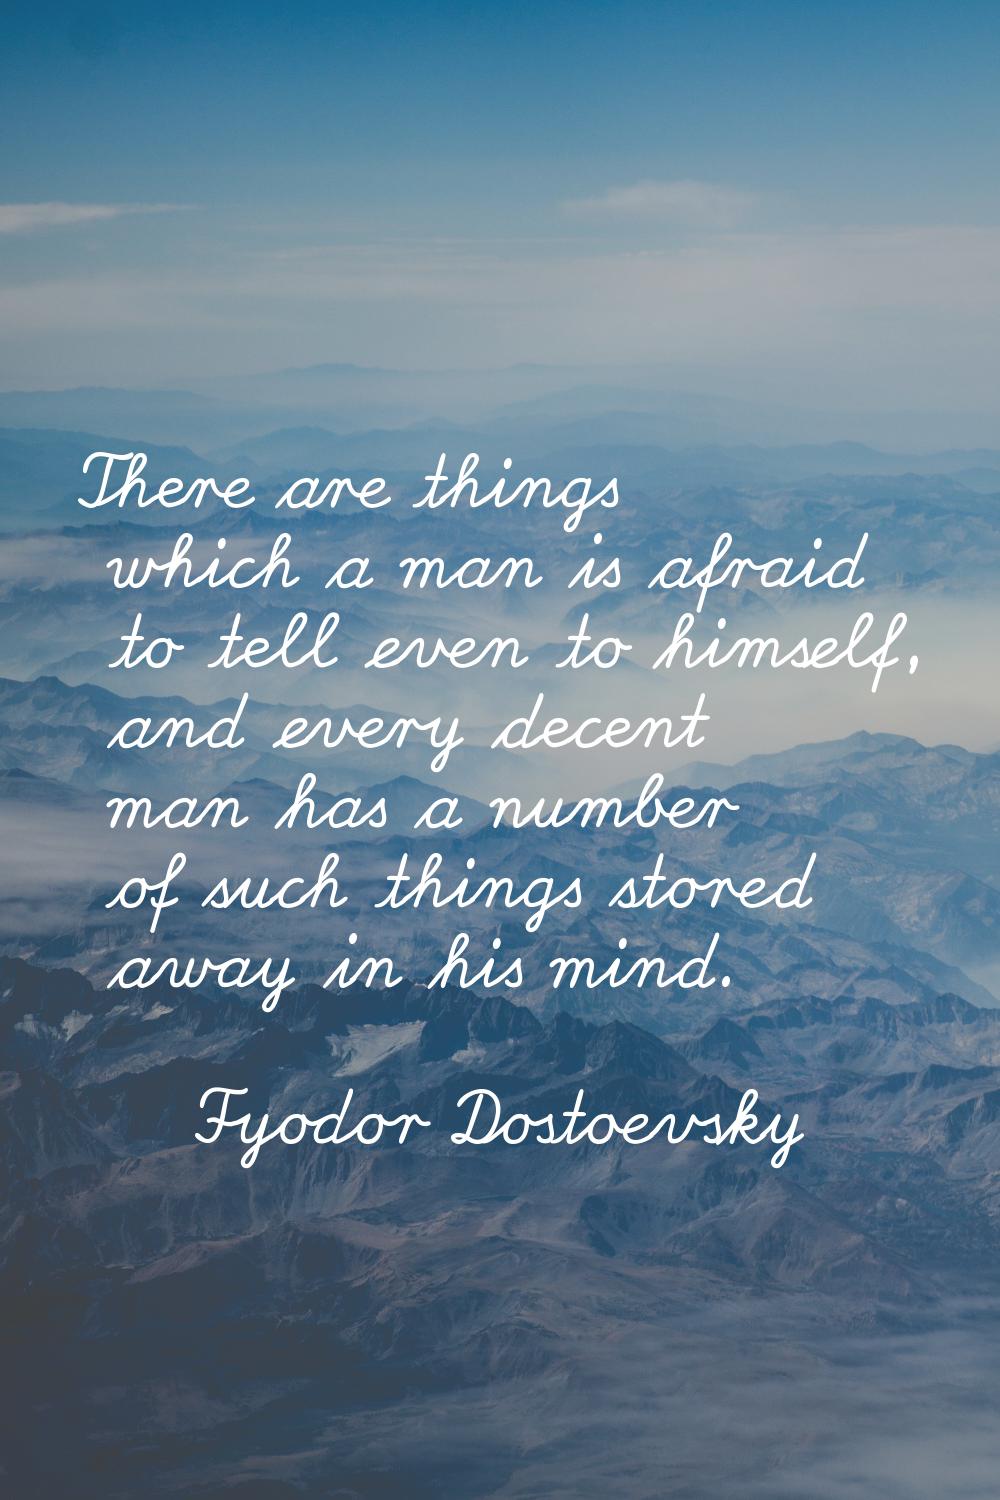 There are things which a man is afraid to tell even to himself, and every decent man has a number o